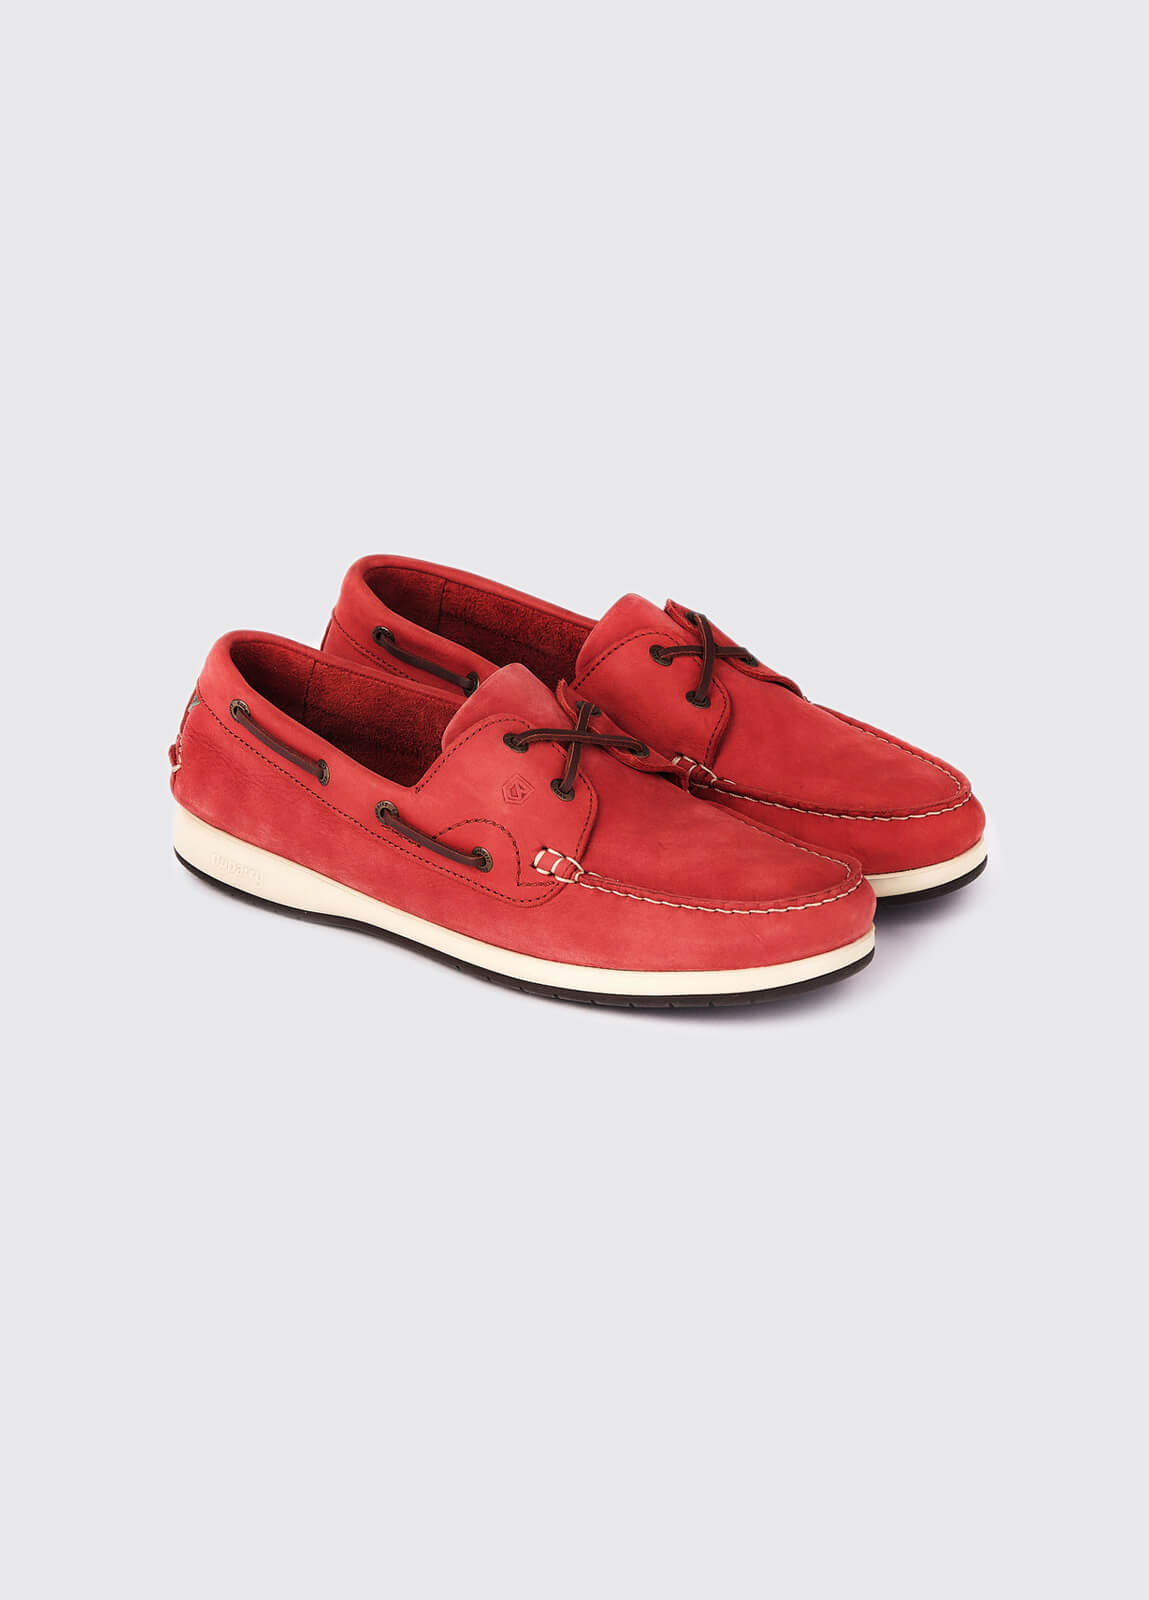 Pacific X LT Deck Shoe - Red